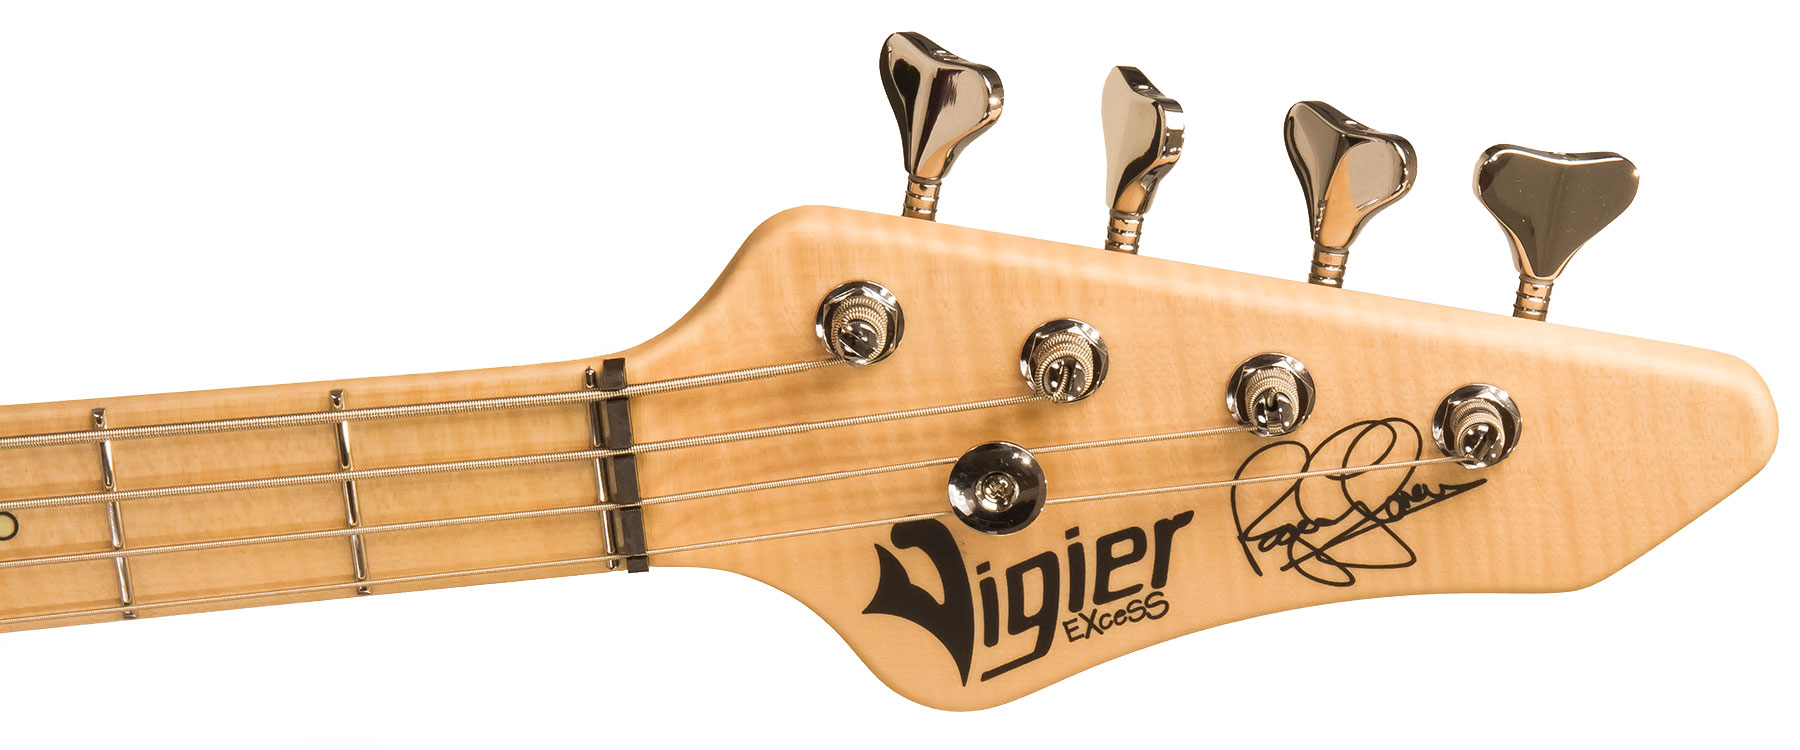 Vigier Roger Glover Excess Original Signature Active Rw - Clear Purple - Solid body electric bass - Variation 4